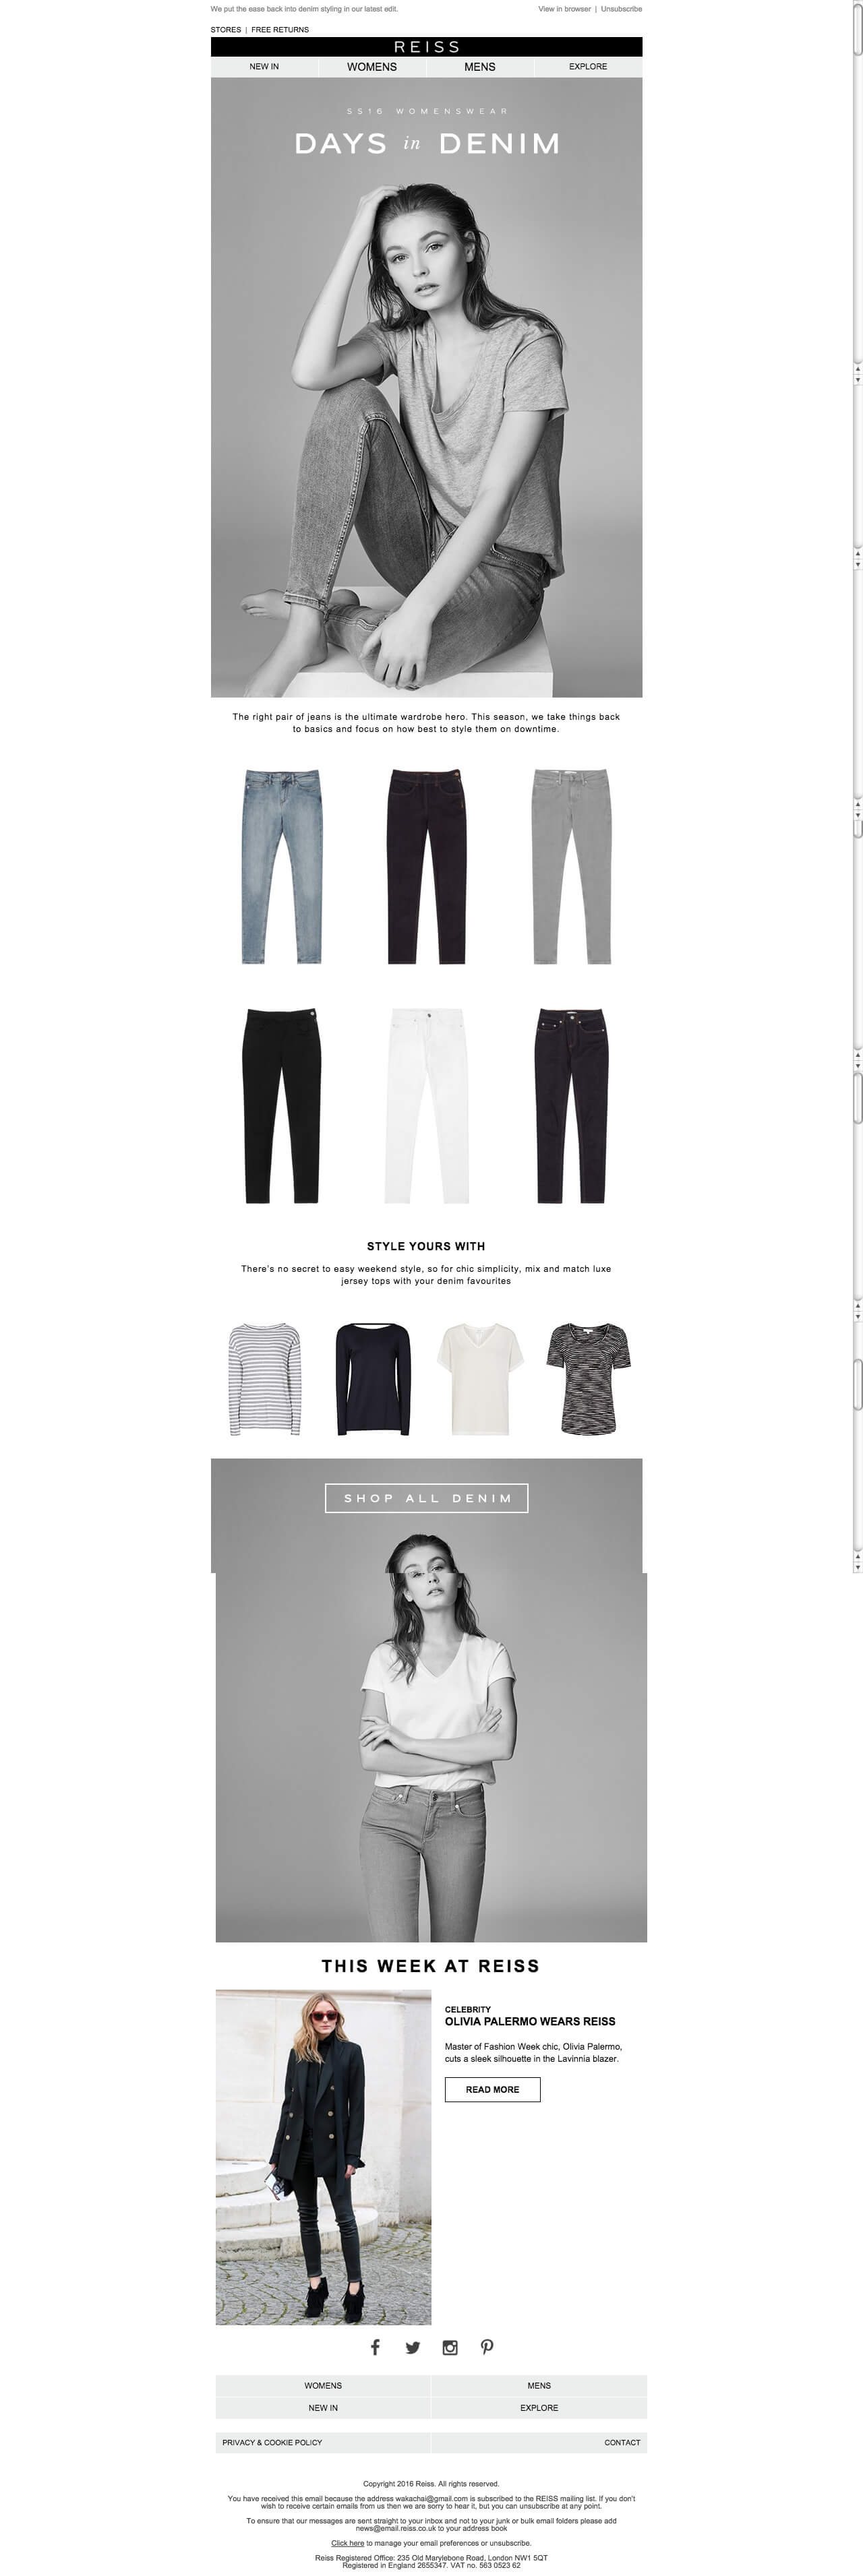 Reiss email marketing strategy 